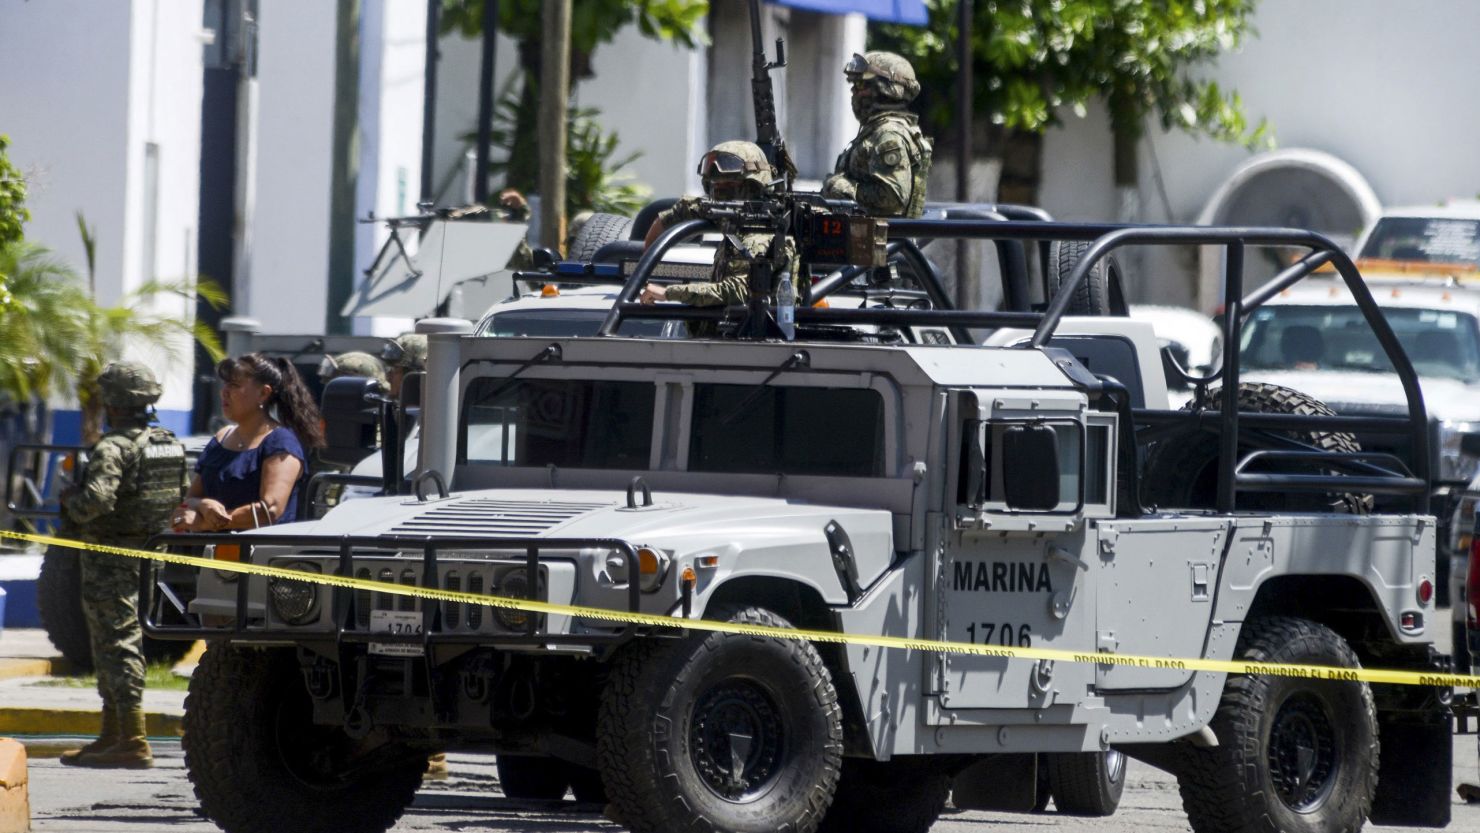 Members of the Mexican navy and federal police take part in an operation Tuesday in Acapulco.